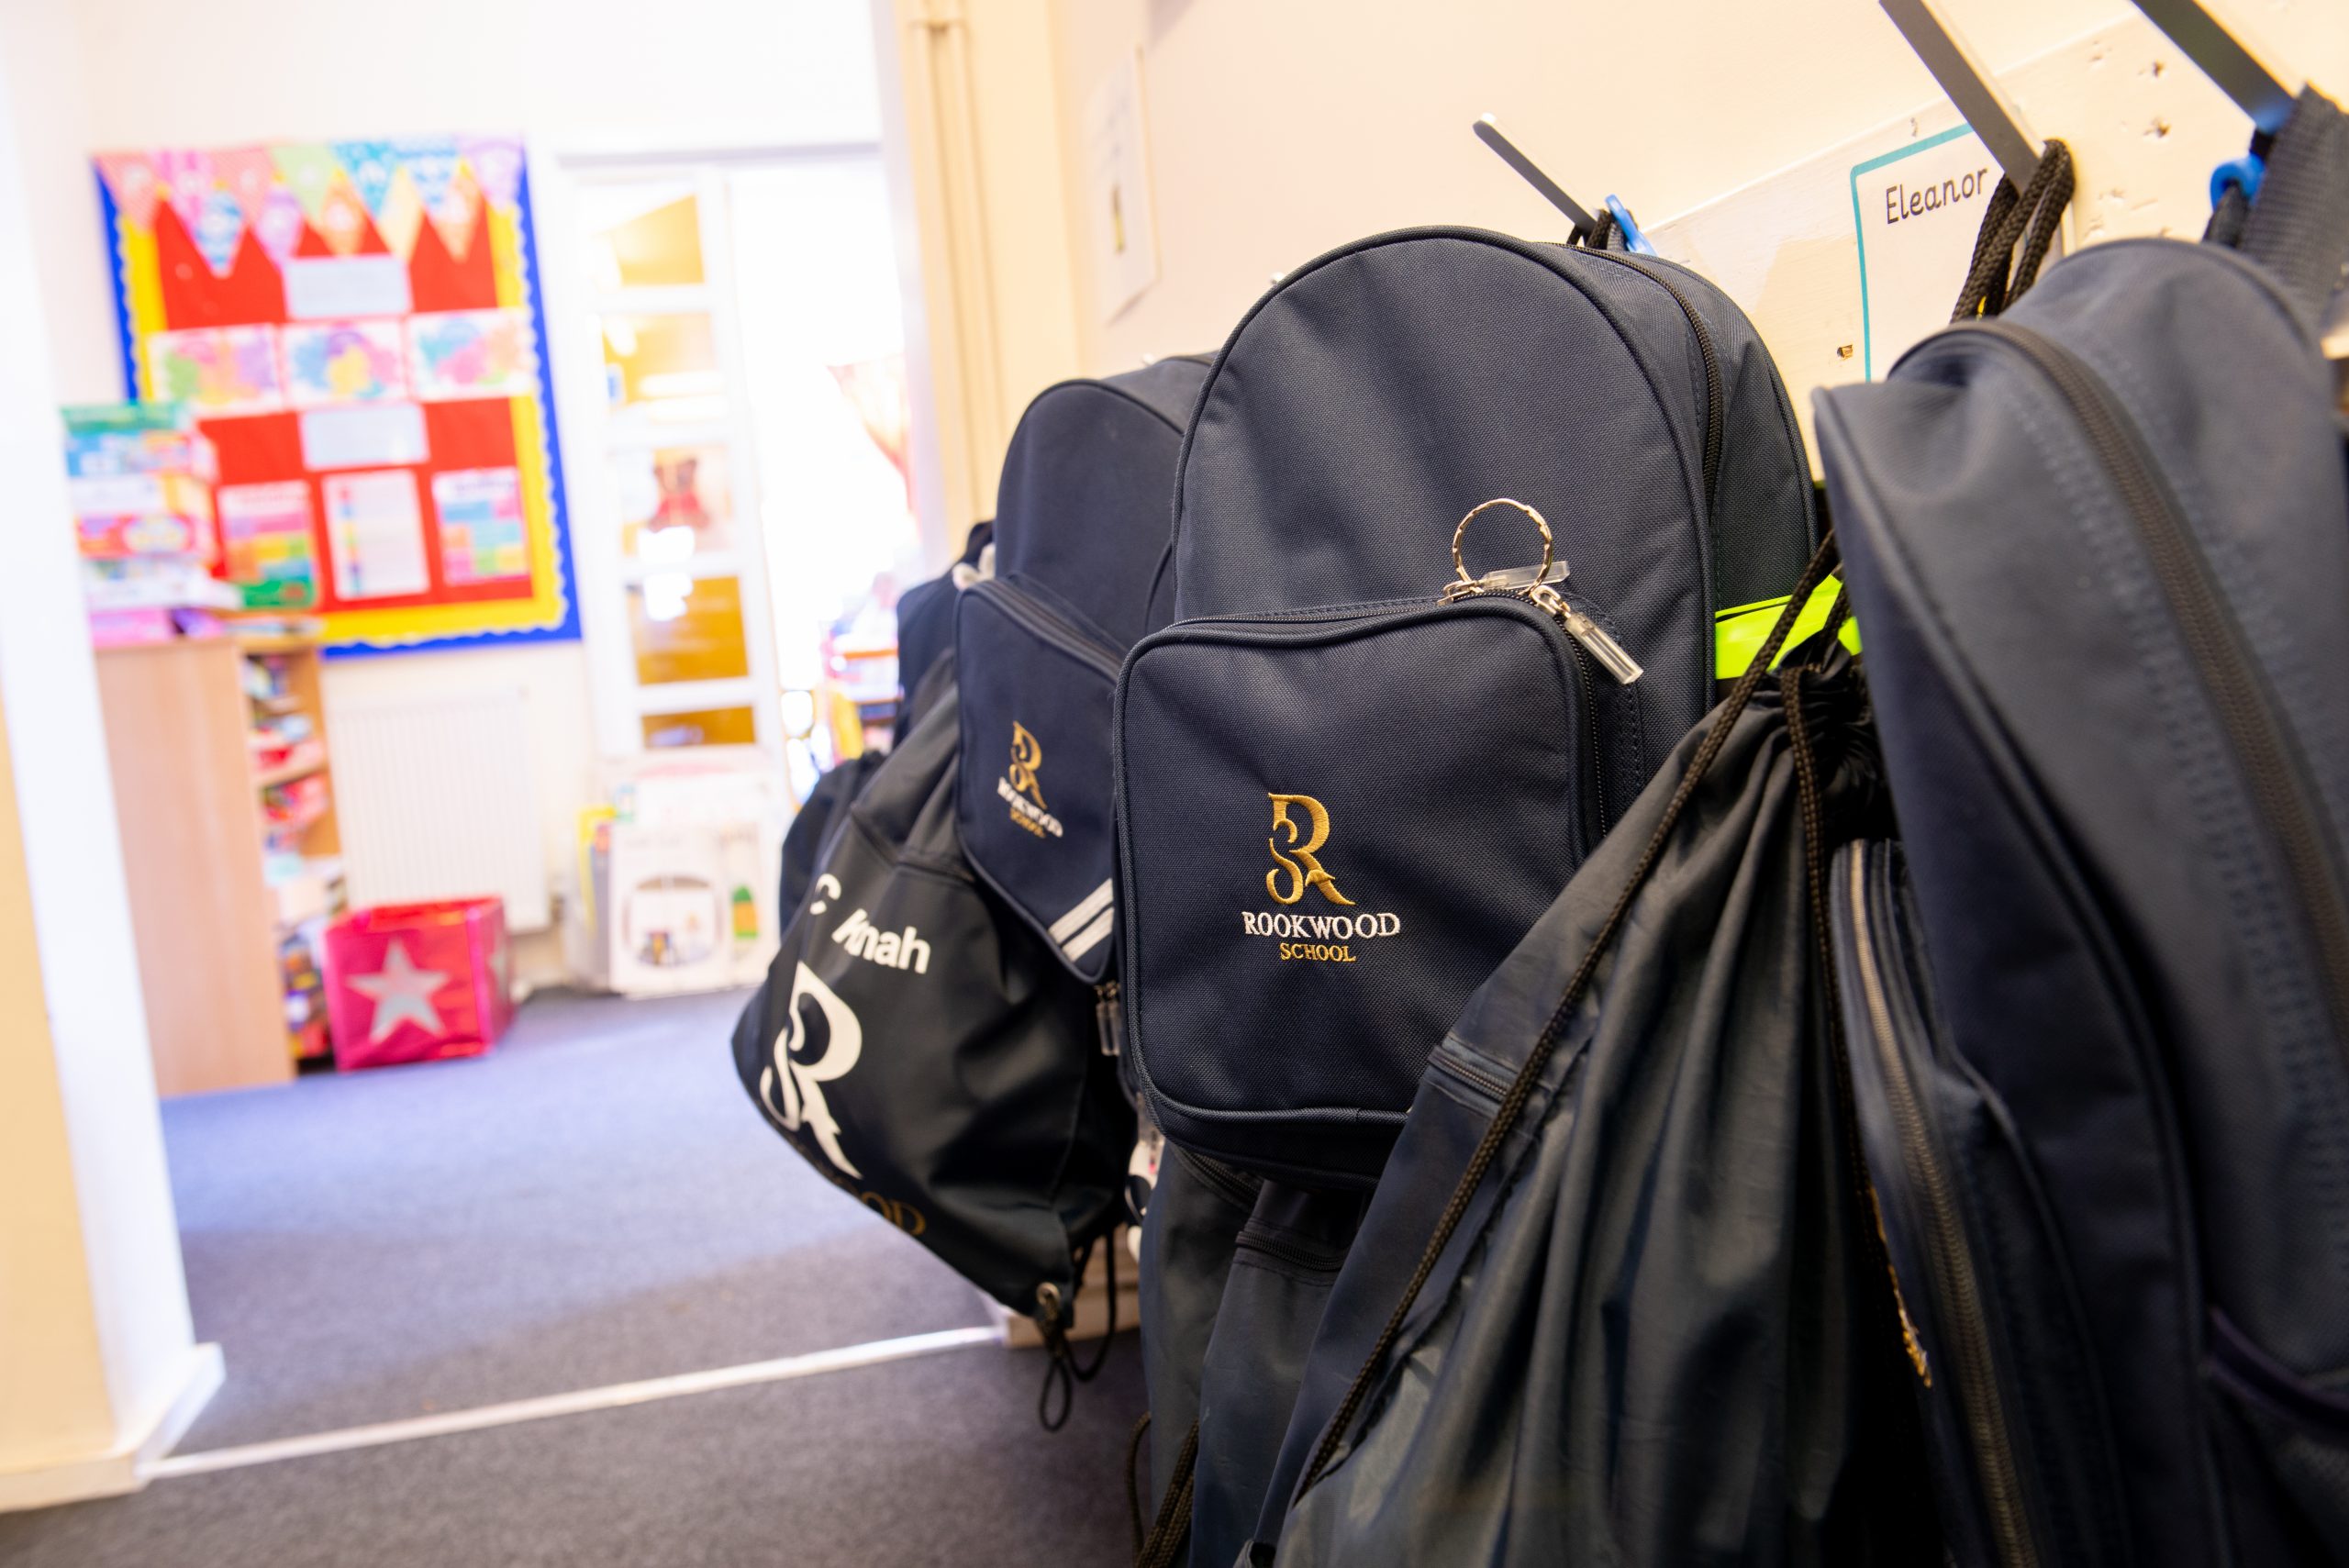 Rookwood School branded bags hung up on coat pegs in the lower school classroom.